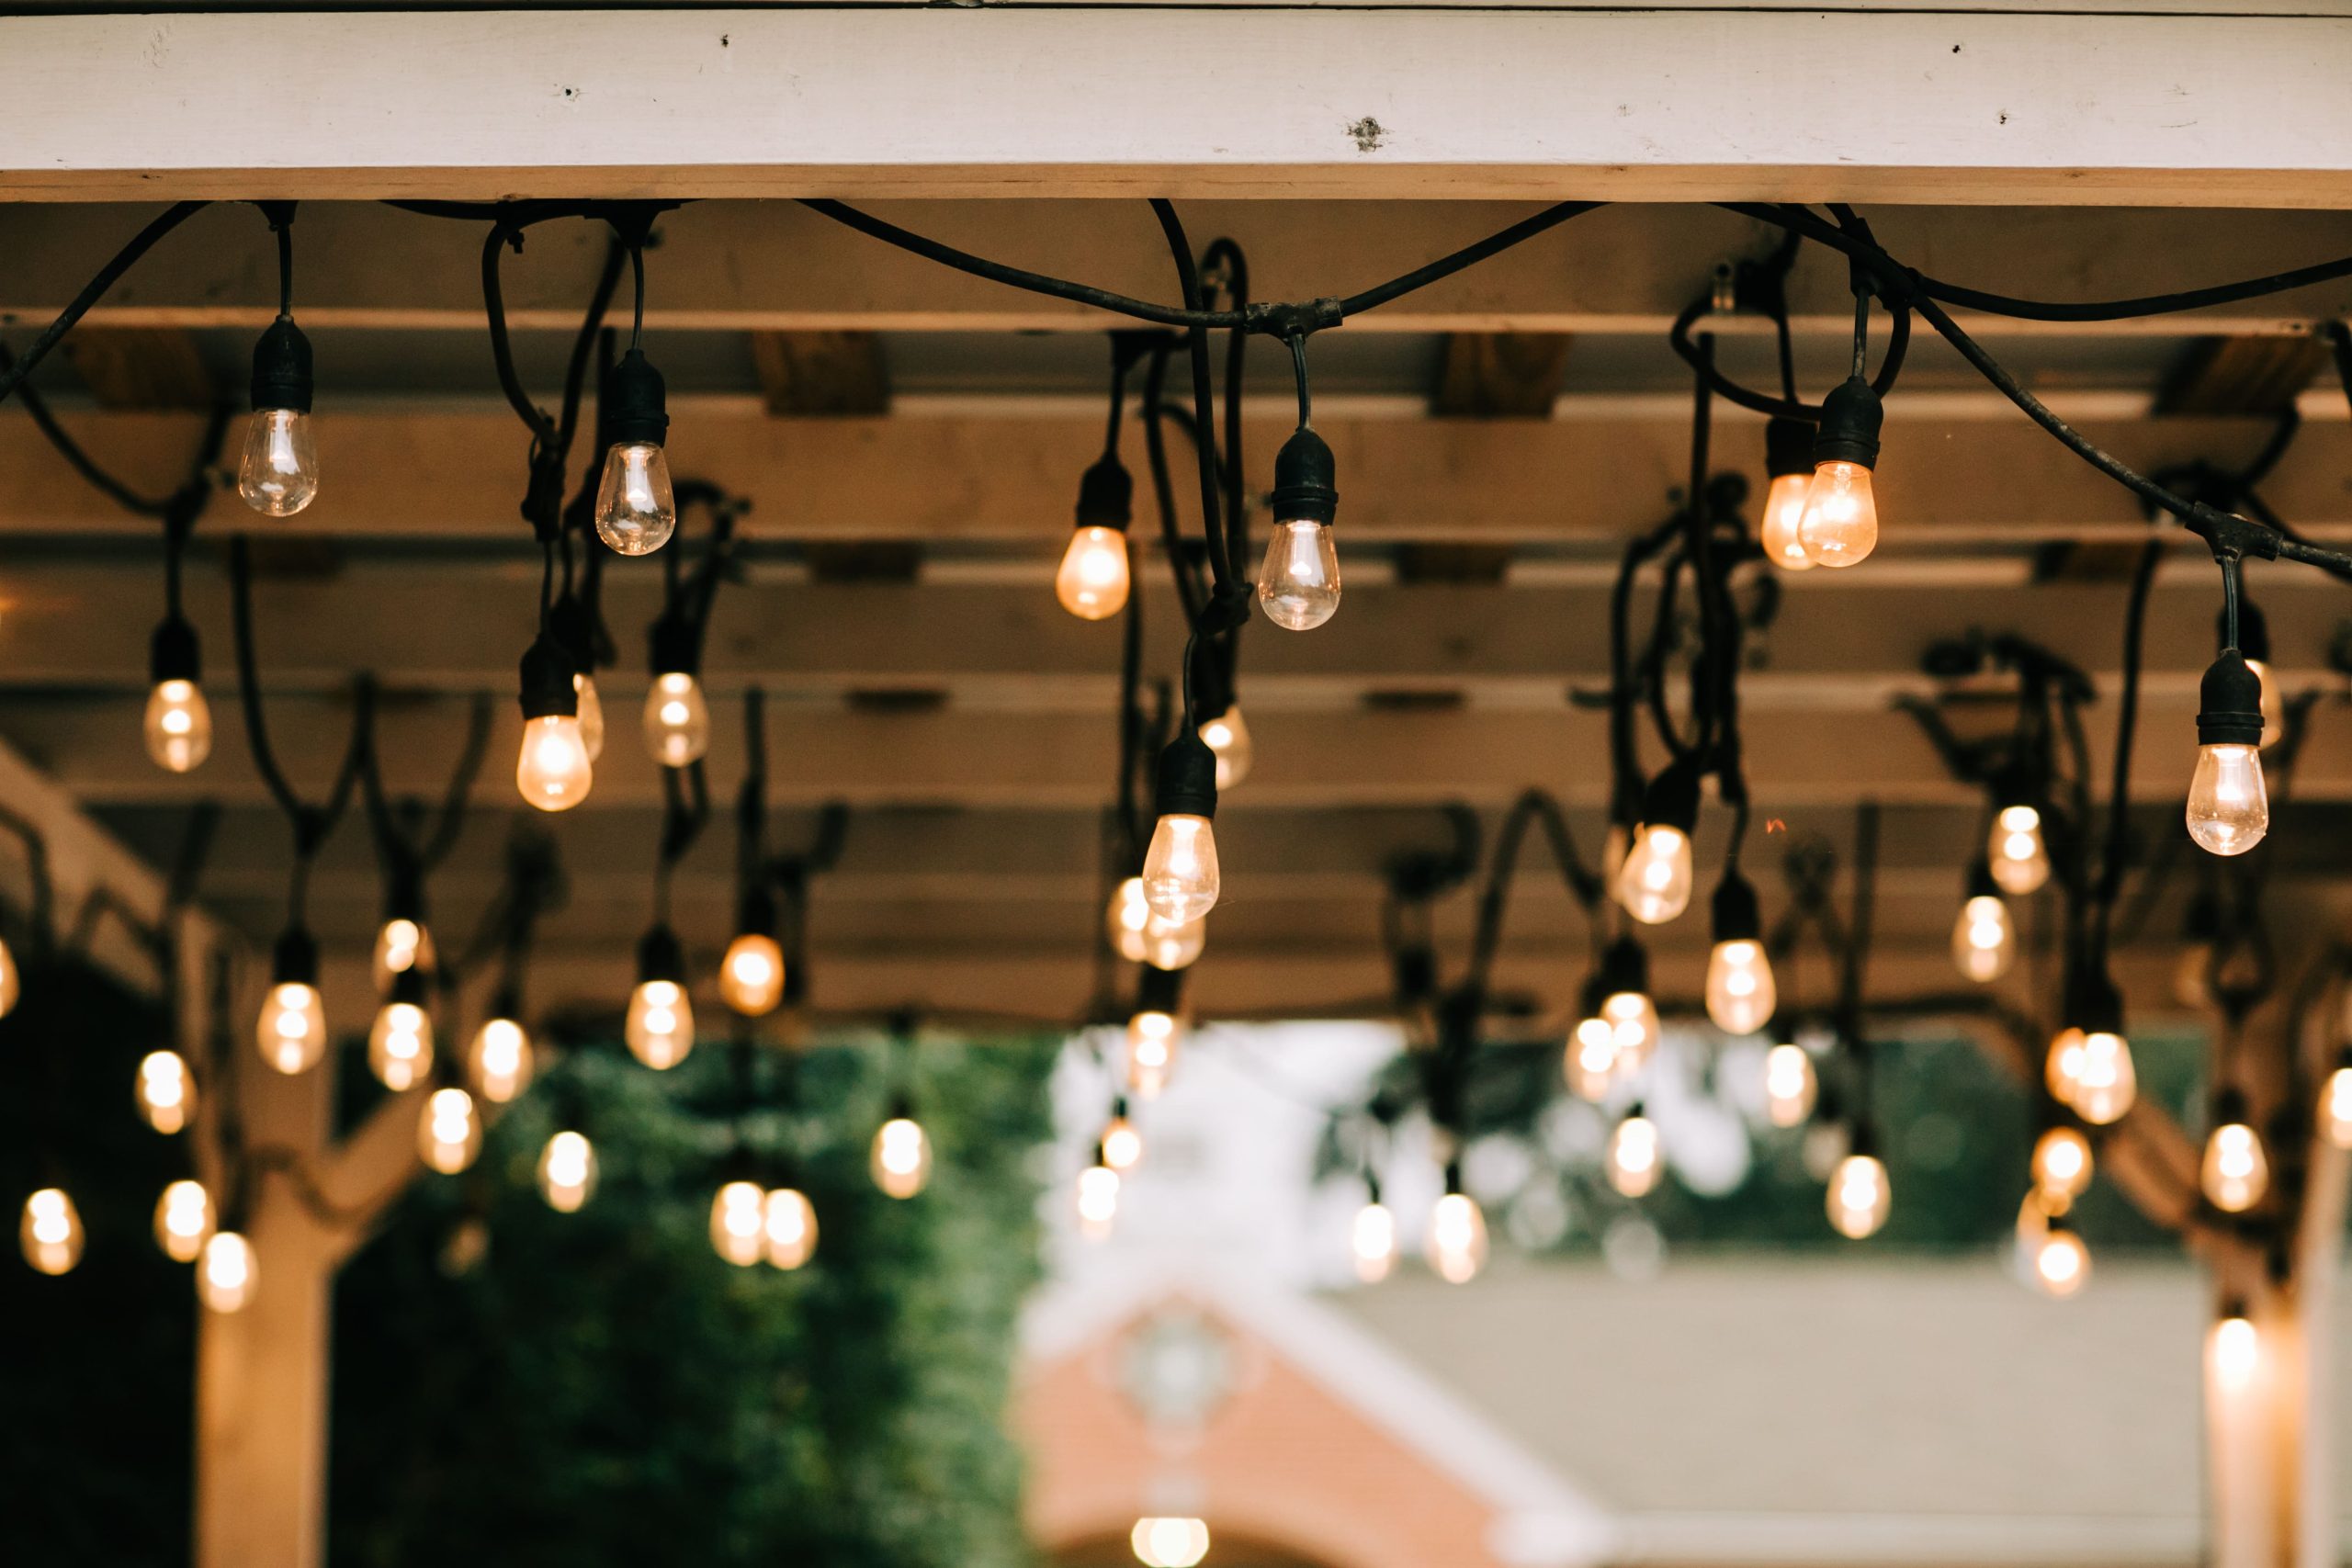 Lights hung on pergola or balcony for romantic atmosphere